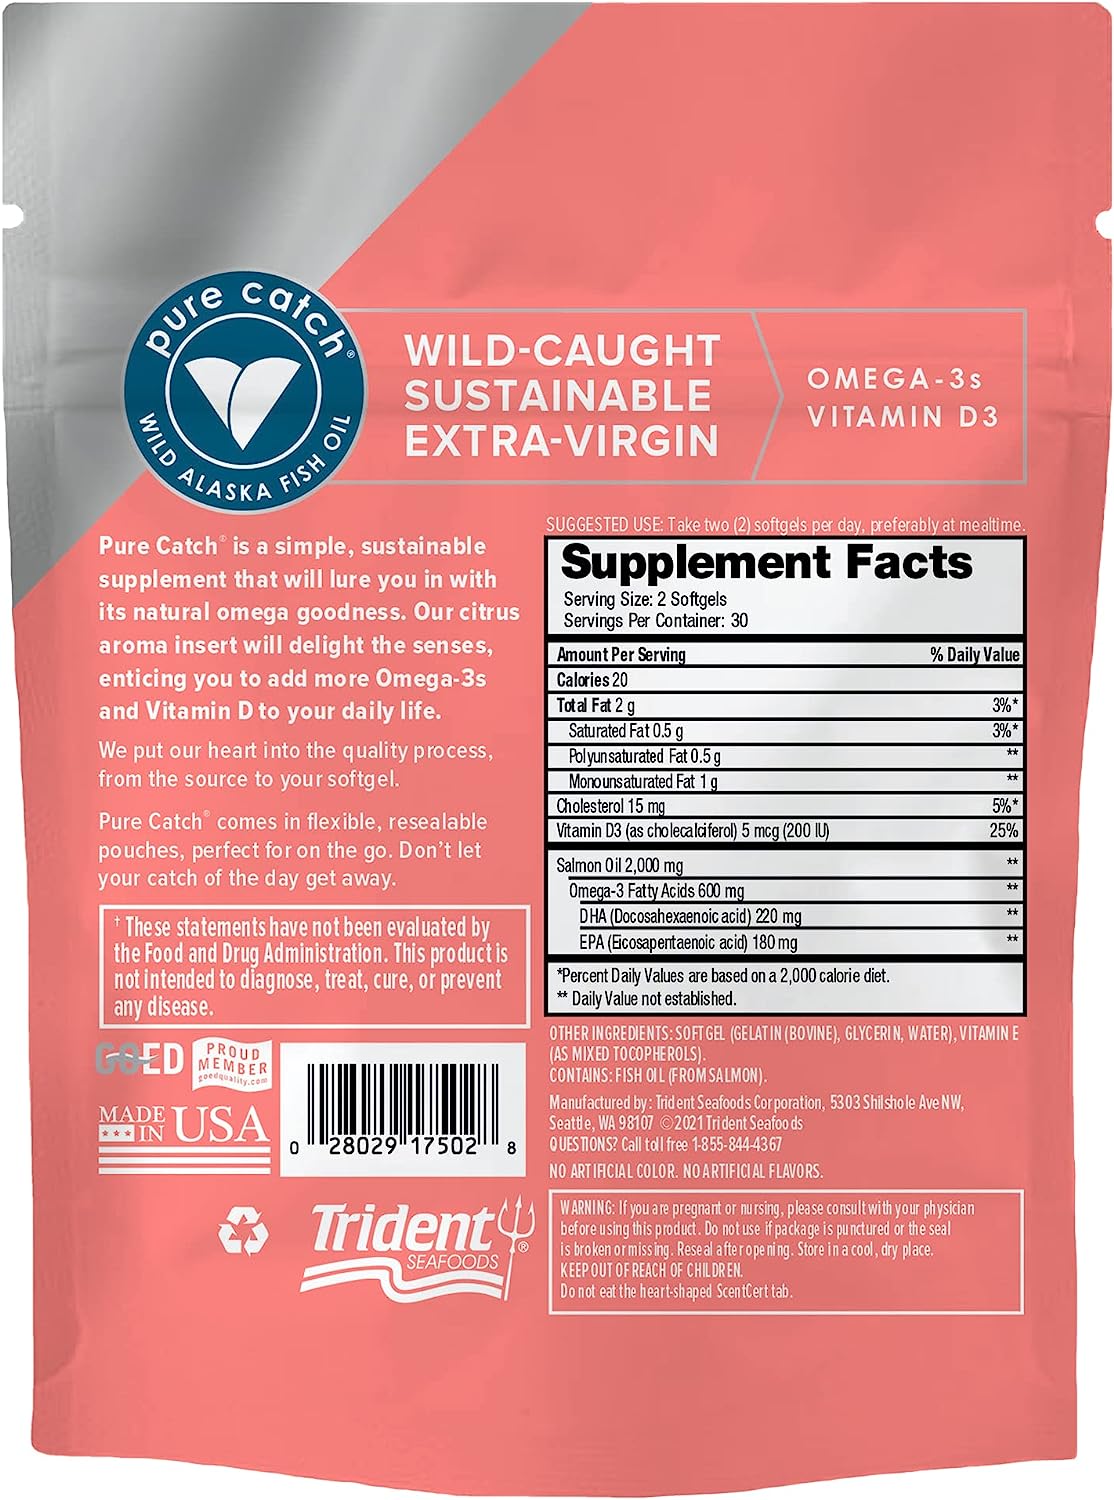 Trident Pure Catch Wild Alaska Salmon Oil Supplement - (60 Count Soft Gels) - Contains Vitamin D3, EPA & DHA Omega-3 Fatty Acids, Supports a Healthy Heart, Joints and Skin, Refreshing Citrus